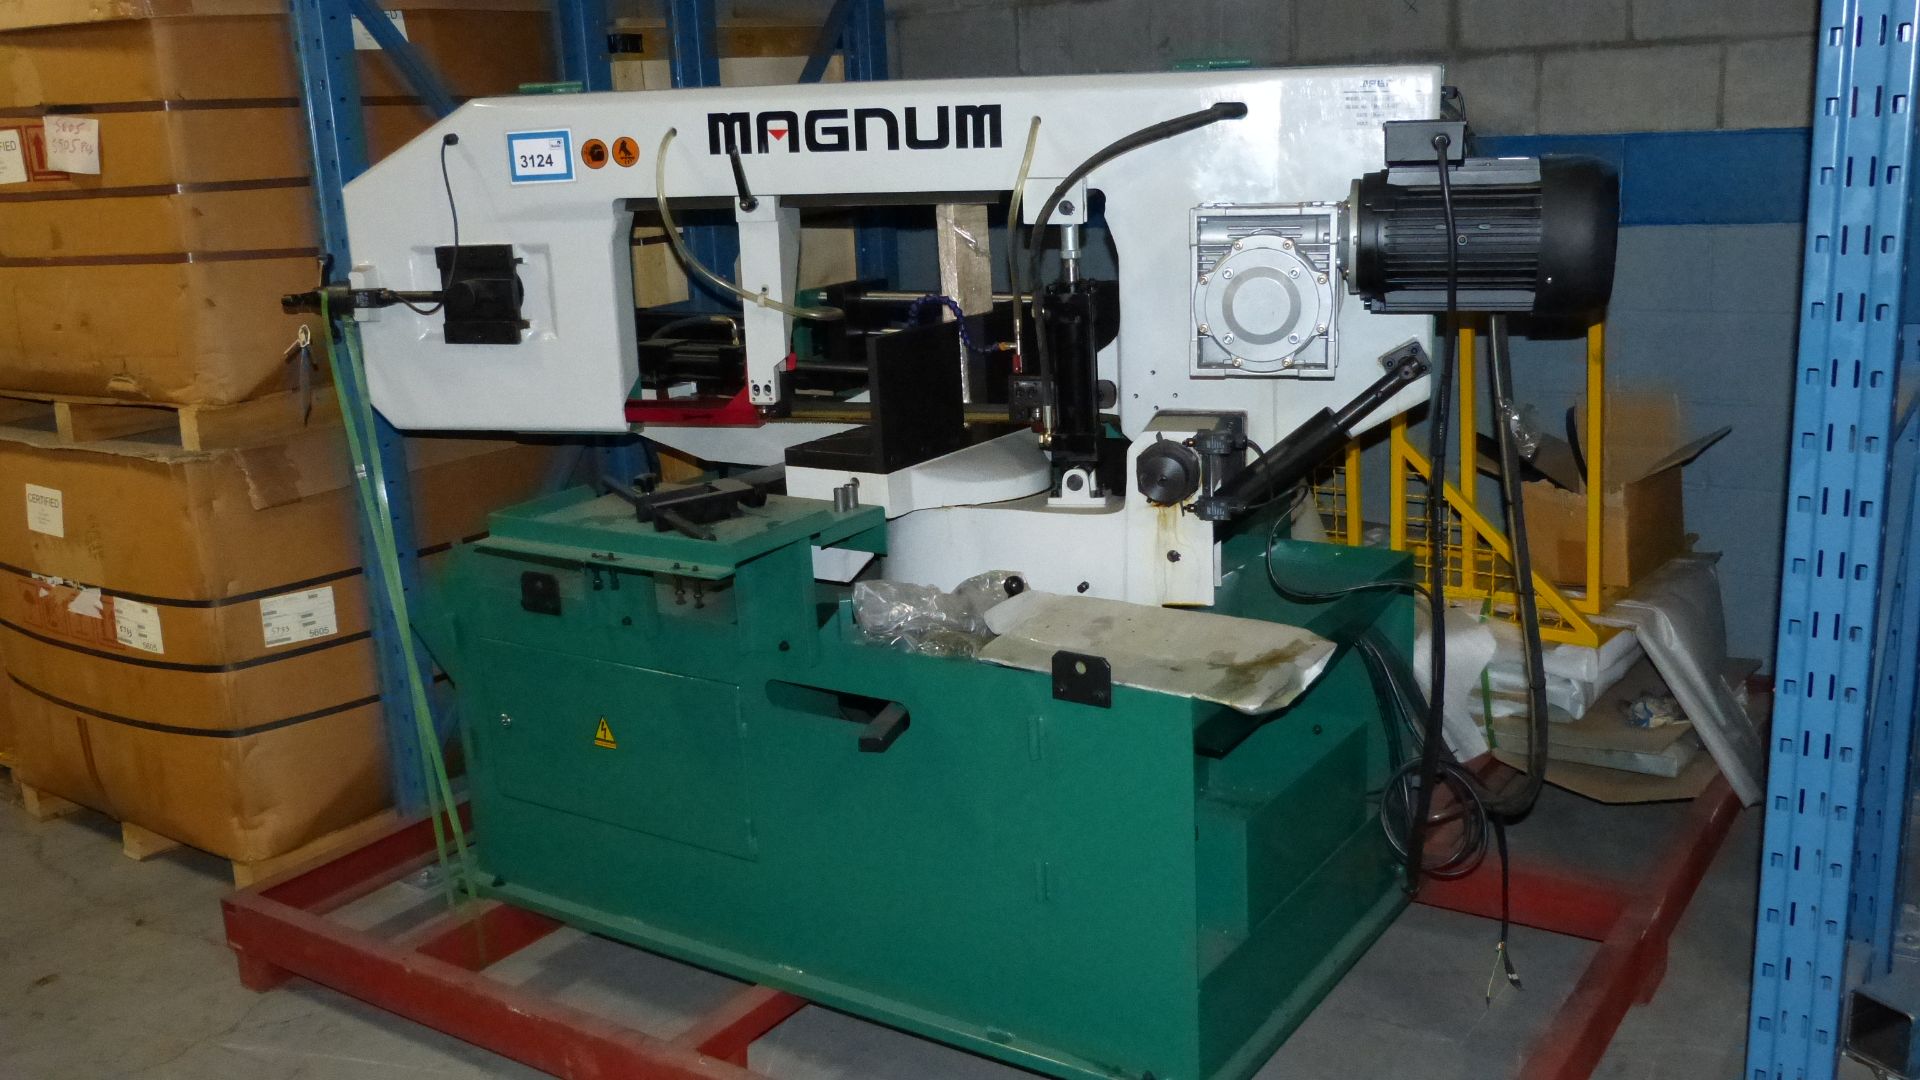 Magnun Model BSM-1813A Horizontal Bandsaw, 24"x15" Capacity, Brand New Never Used, New 2015 - Image 6 of 6